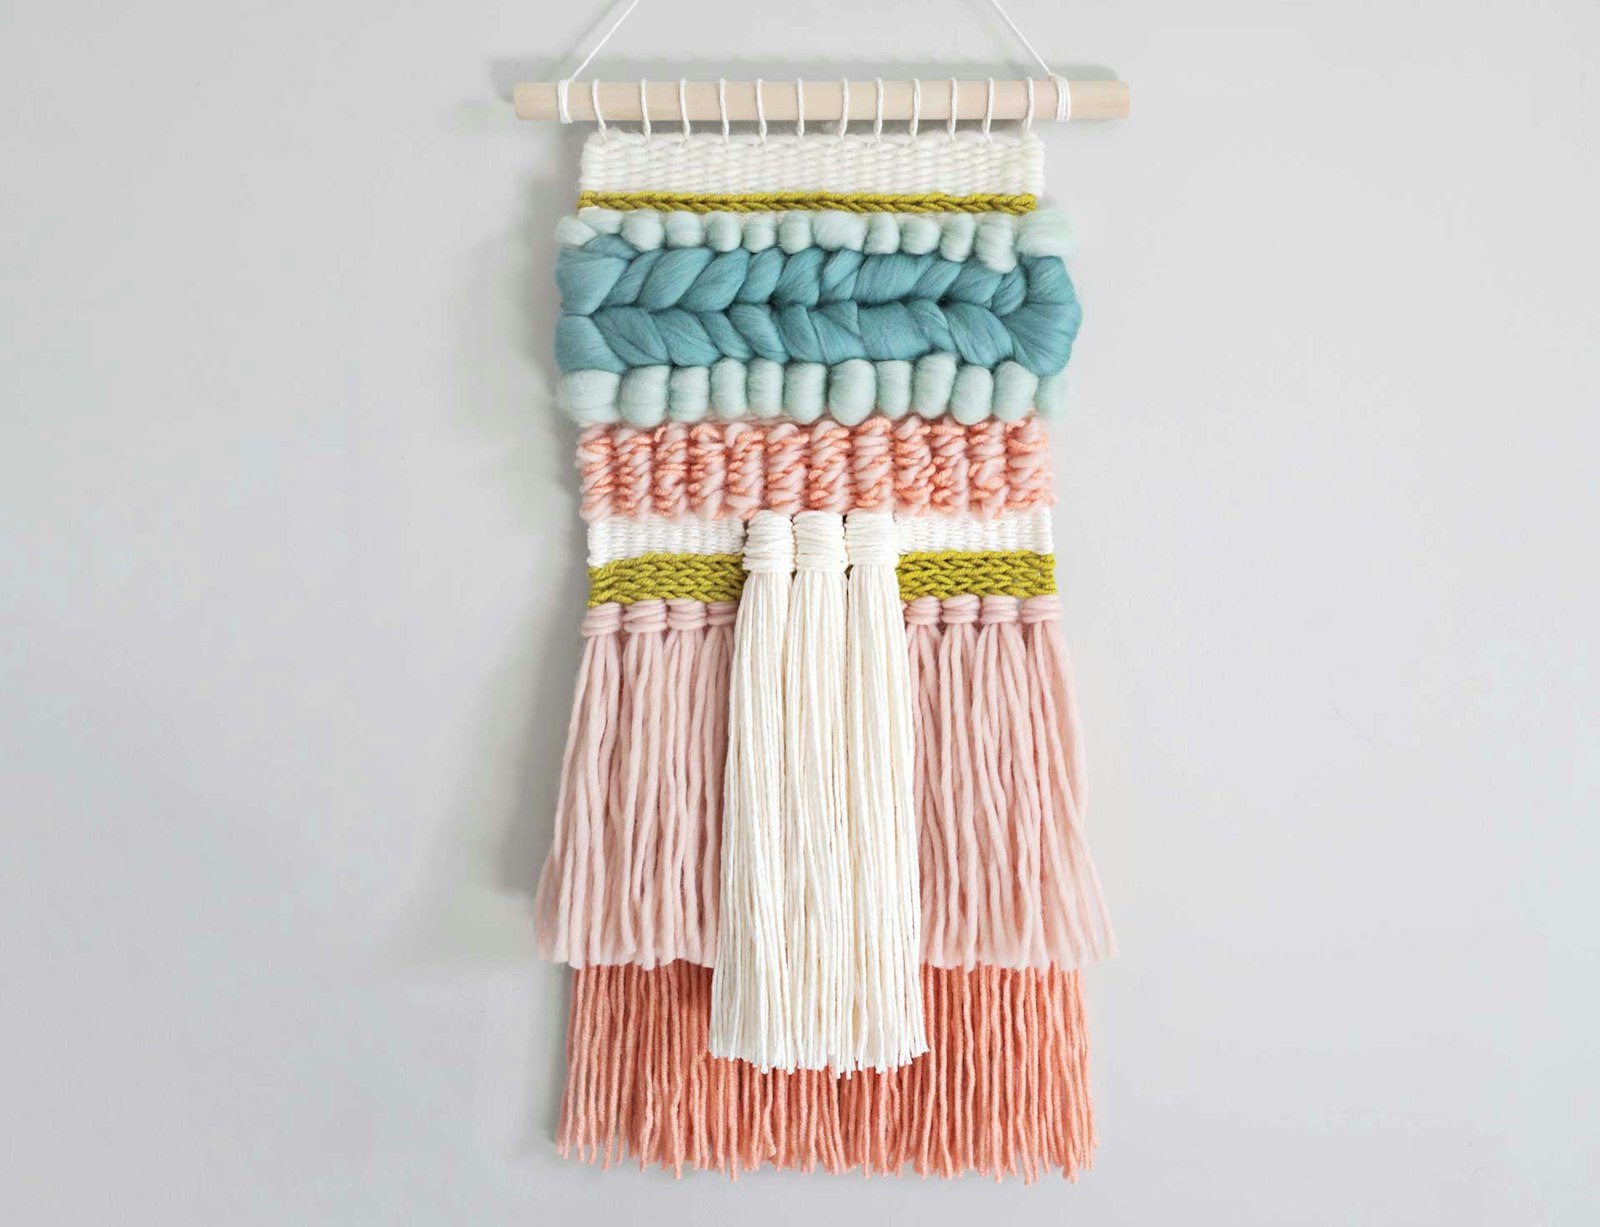 Tapestry Tech: Weaving Your First Wall Hanging